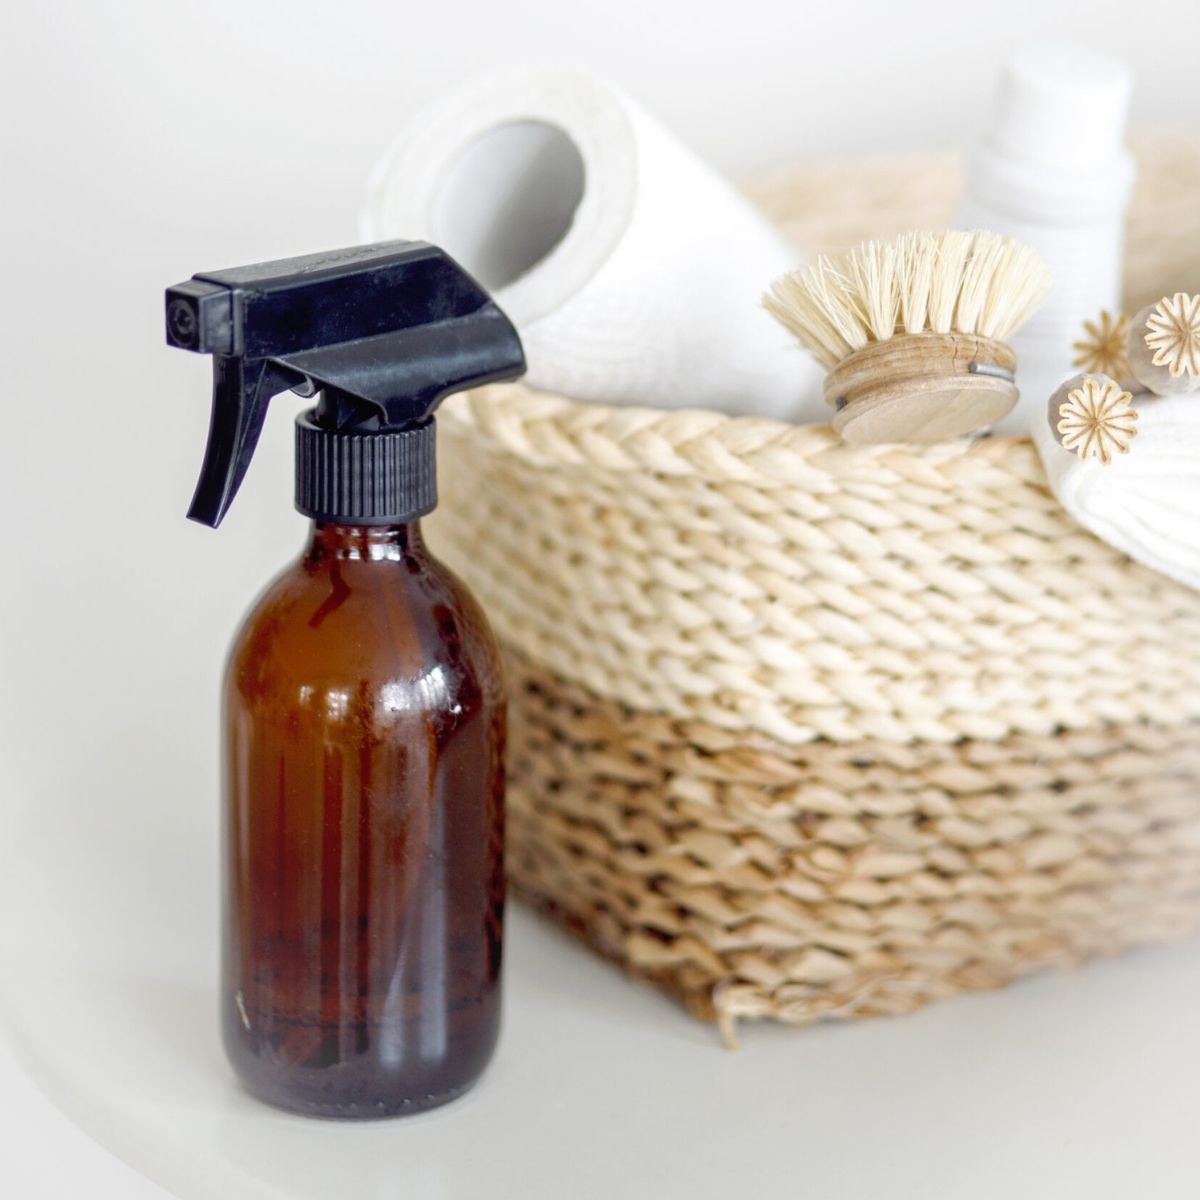 how to clean your home with vinegar